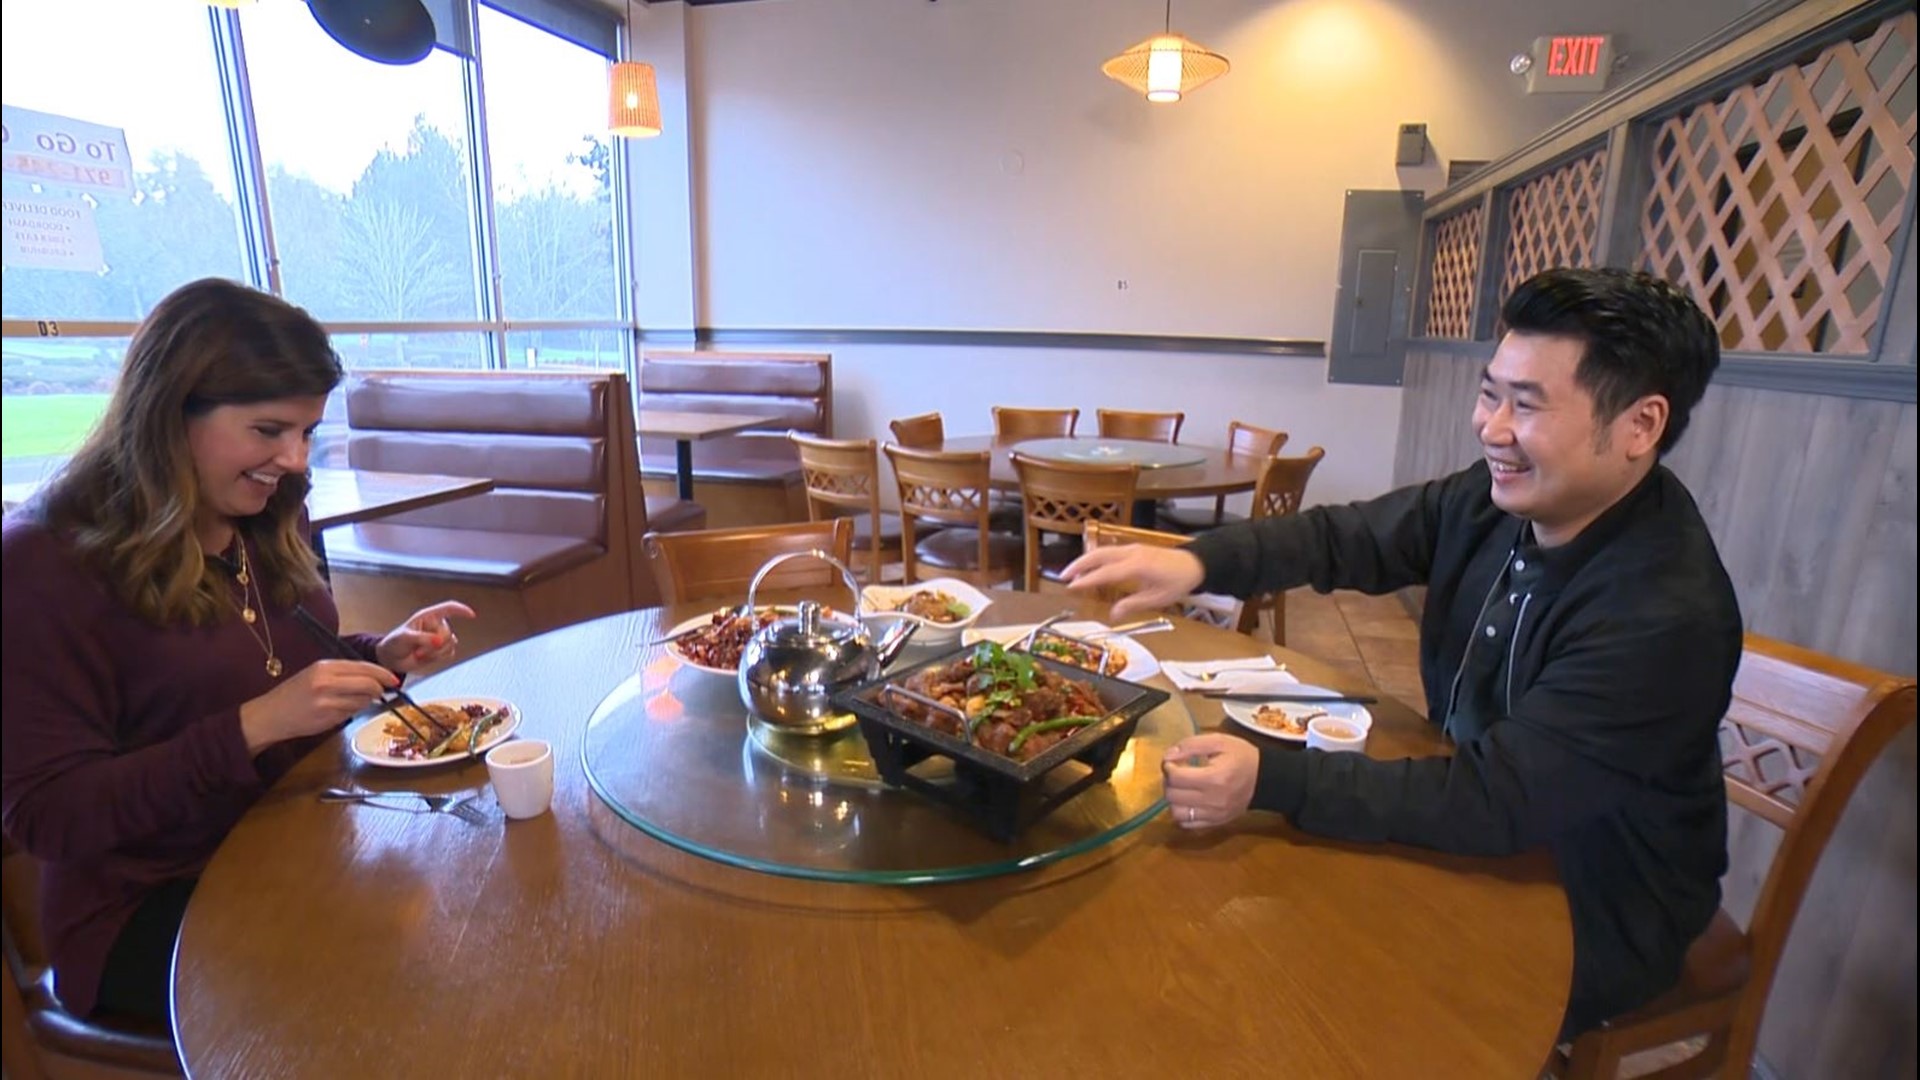 Daniel Chen owns Szechuan Garden in Beaverton. He moved from China 13 years ago and hopes the Winter Olympics in Beijing inspire people to try more Chinese dishes.